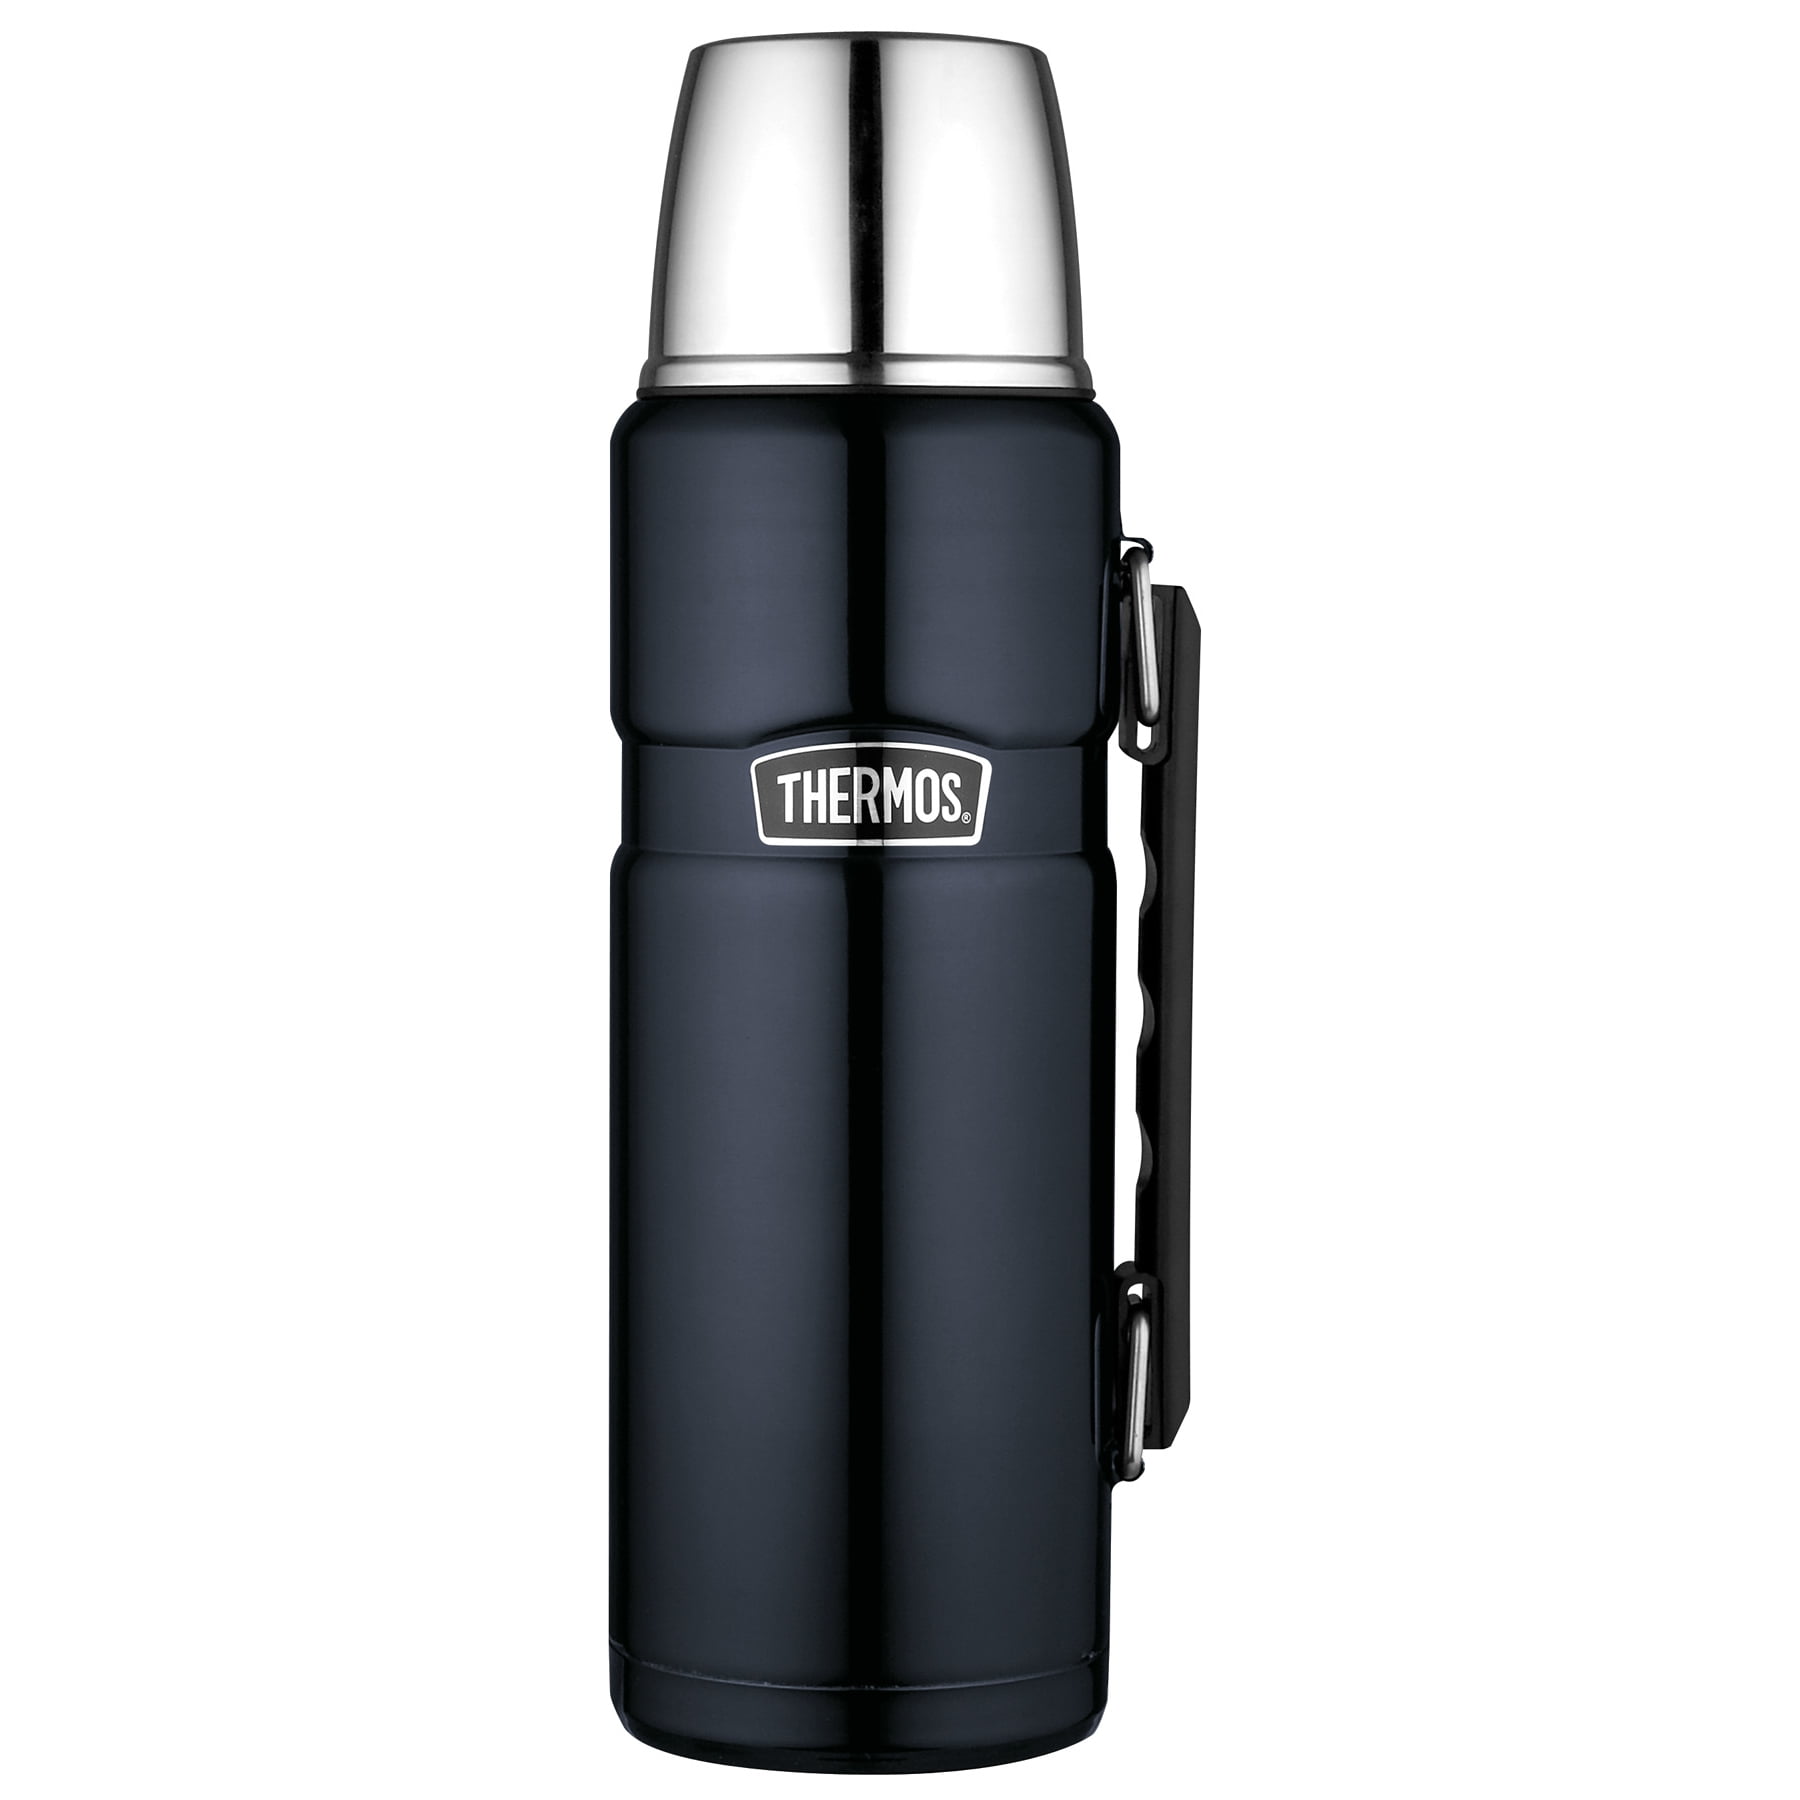 Thermos 40 oz Stainless King Vacuum Insulated Stainless Steel Beverage Bottle